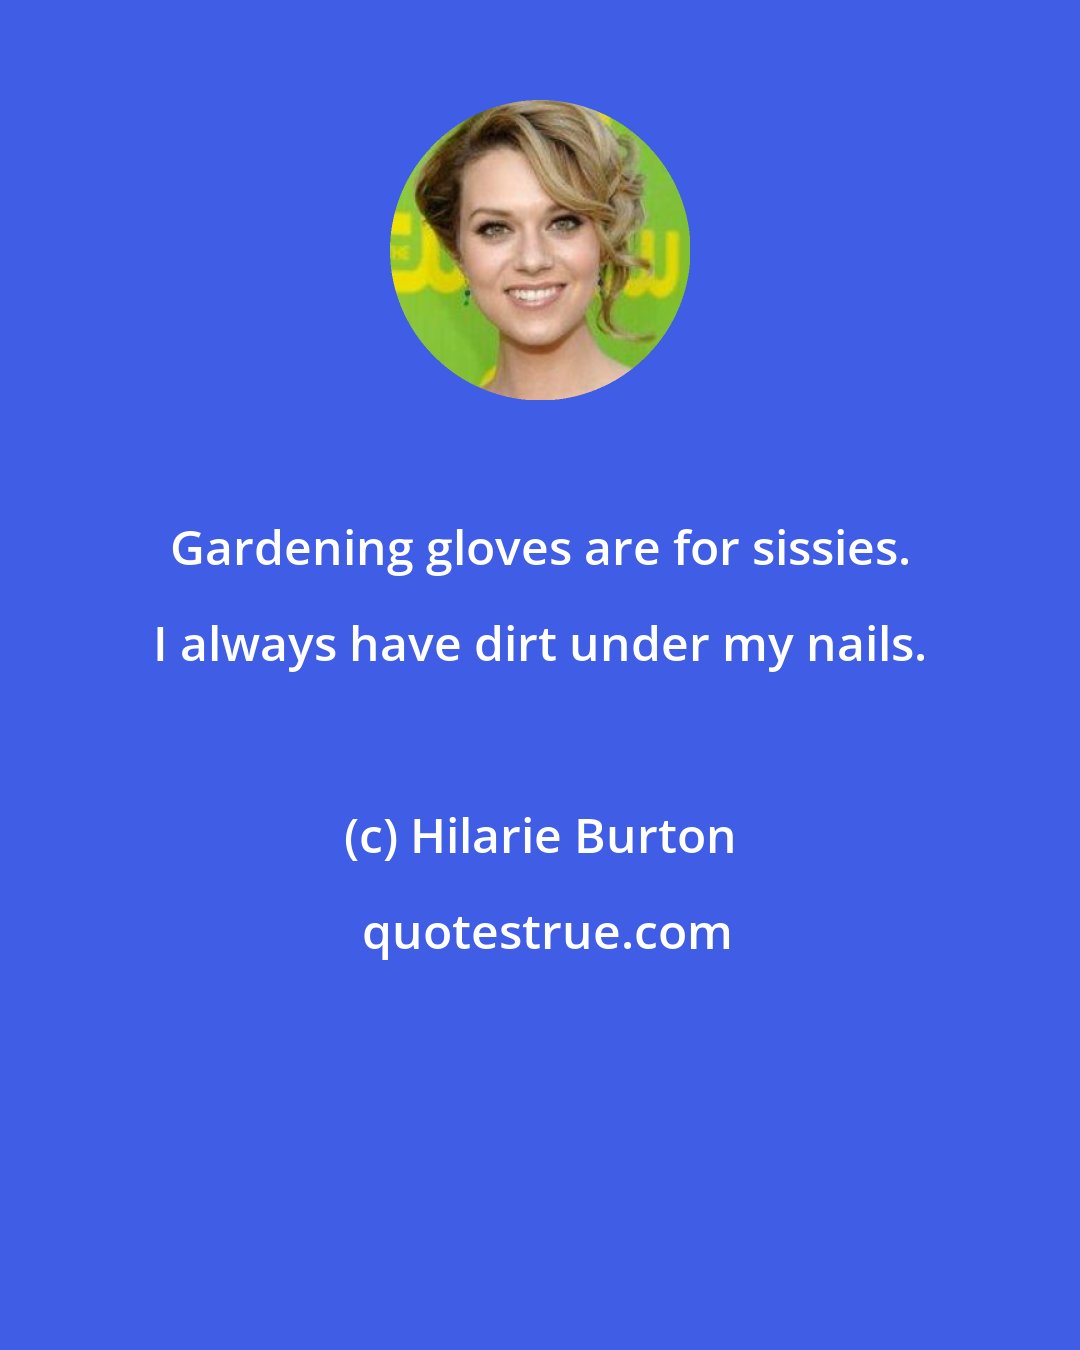 Hilarie Burton: Gardening gloves are for sissies. I always have dirt under my nails.